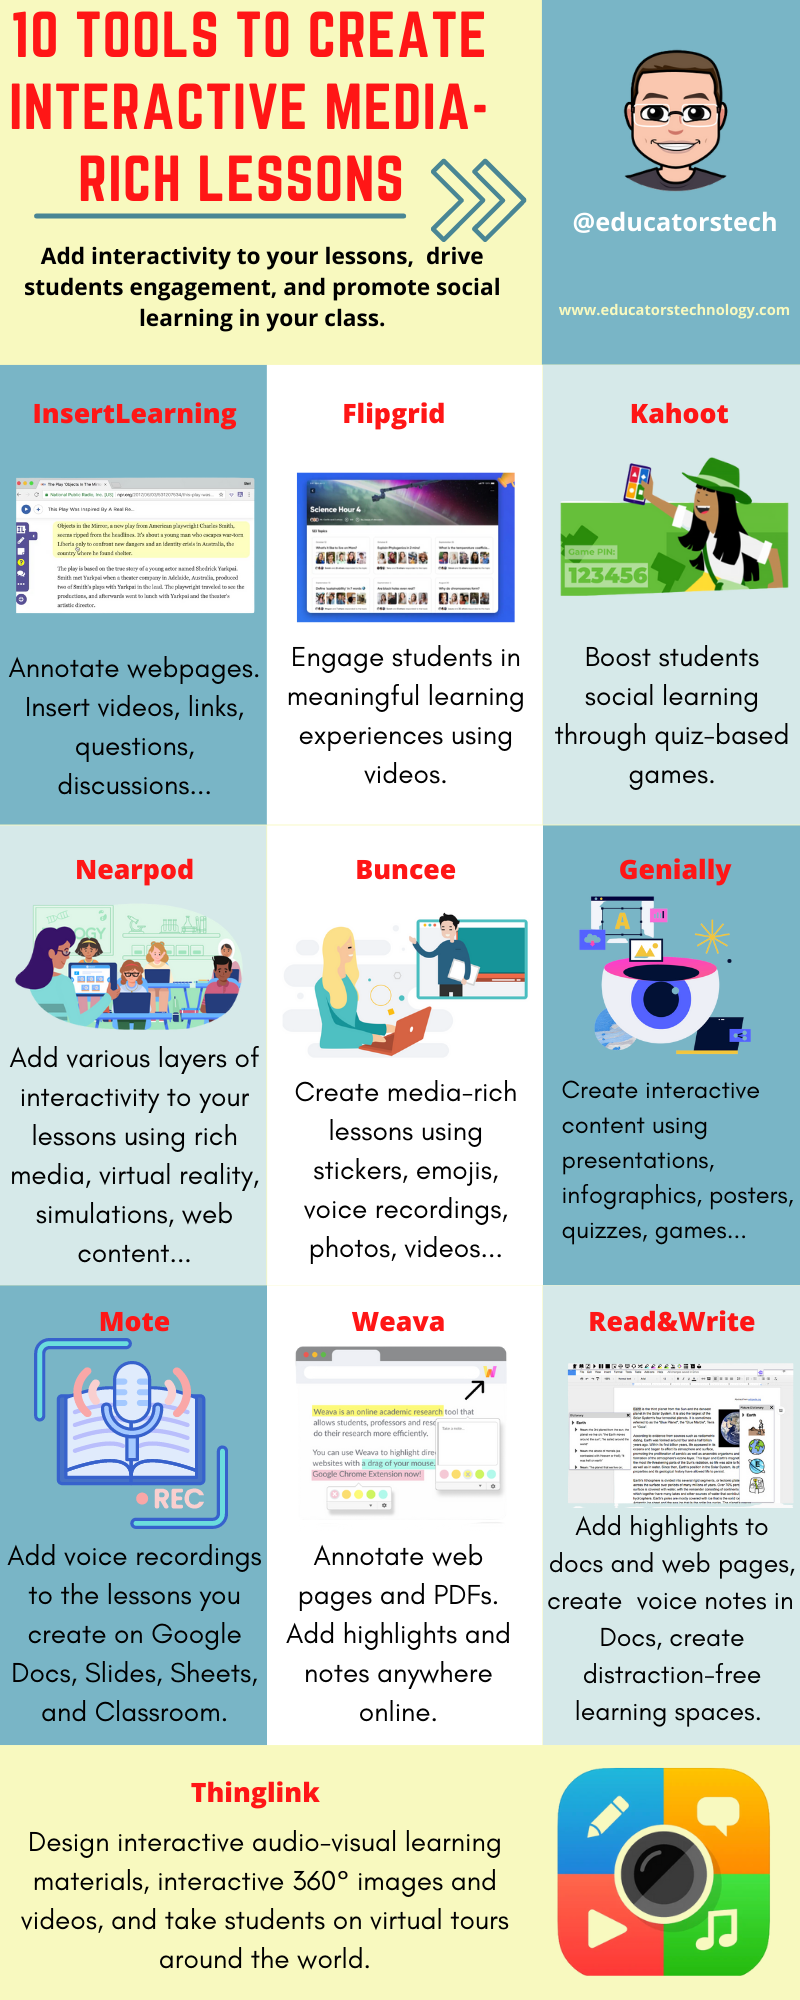 10 EdTech Tools to Help Teachers Create Interactive Media-rich Lessons